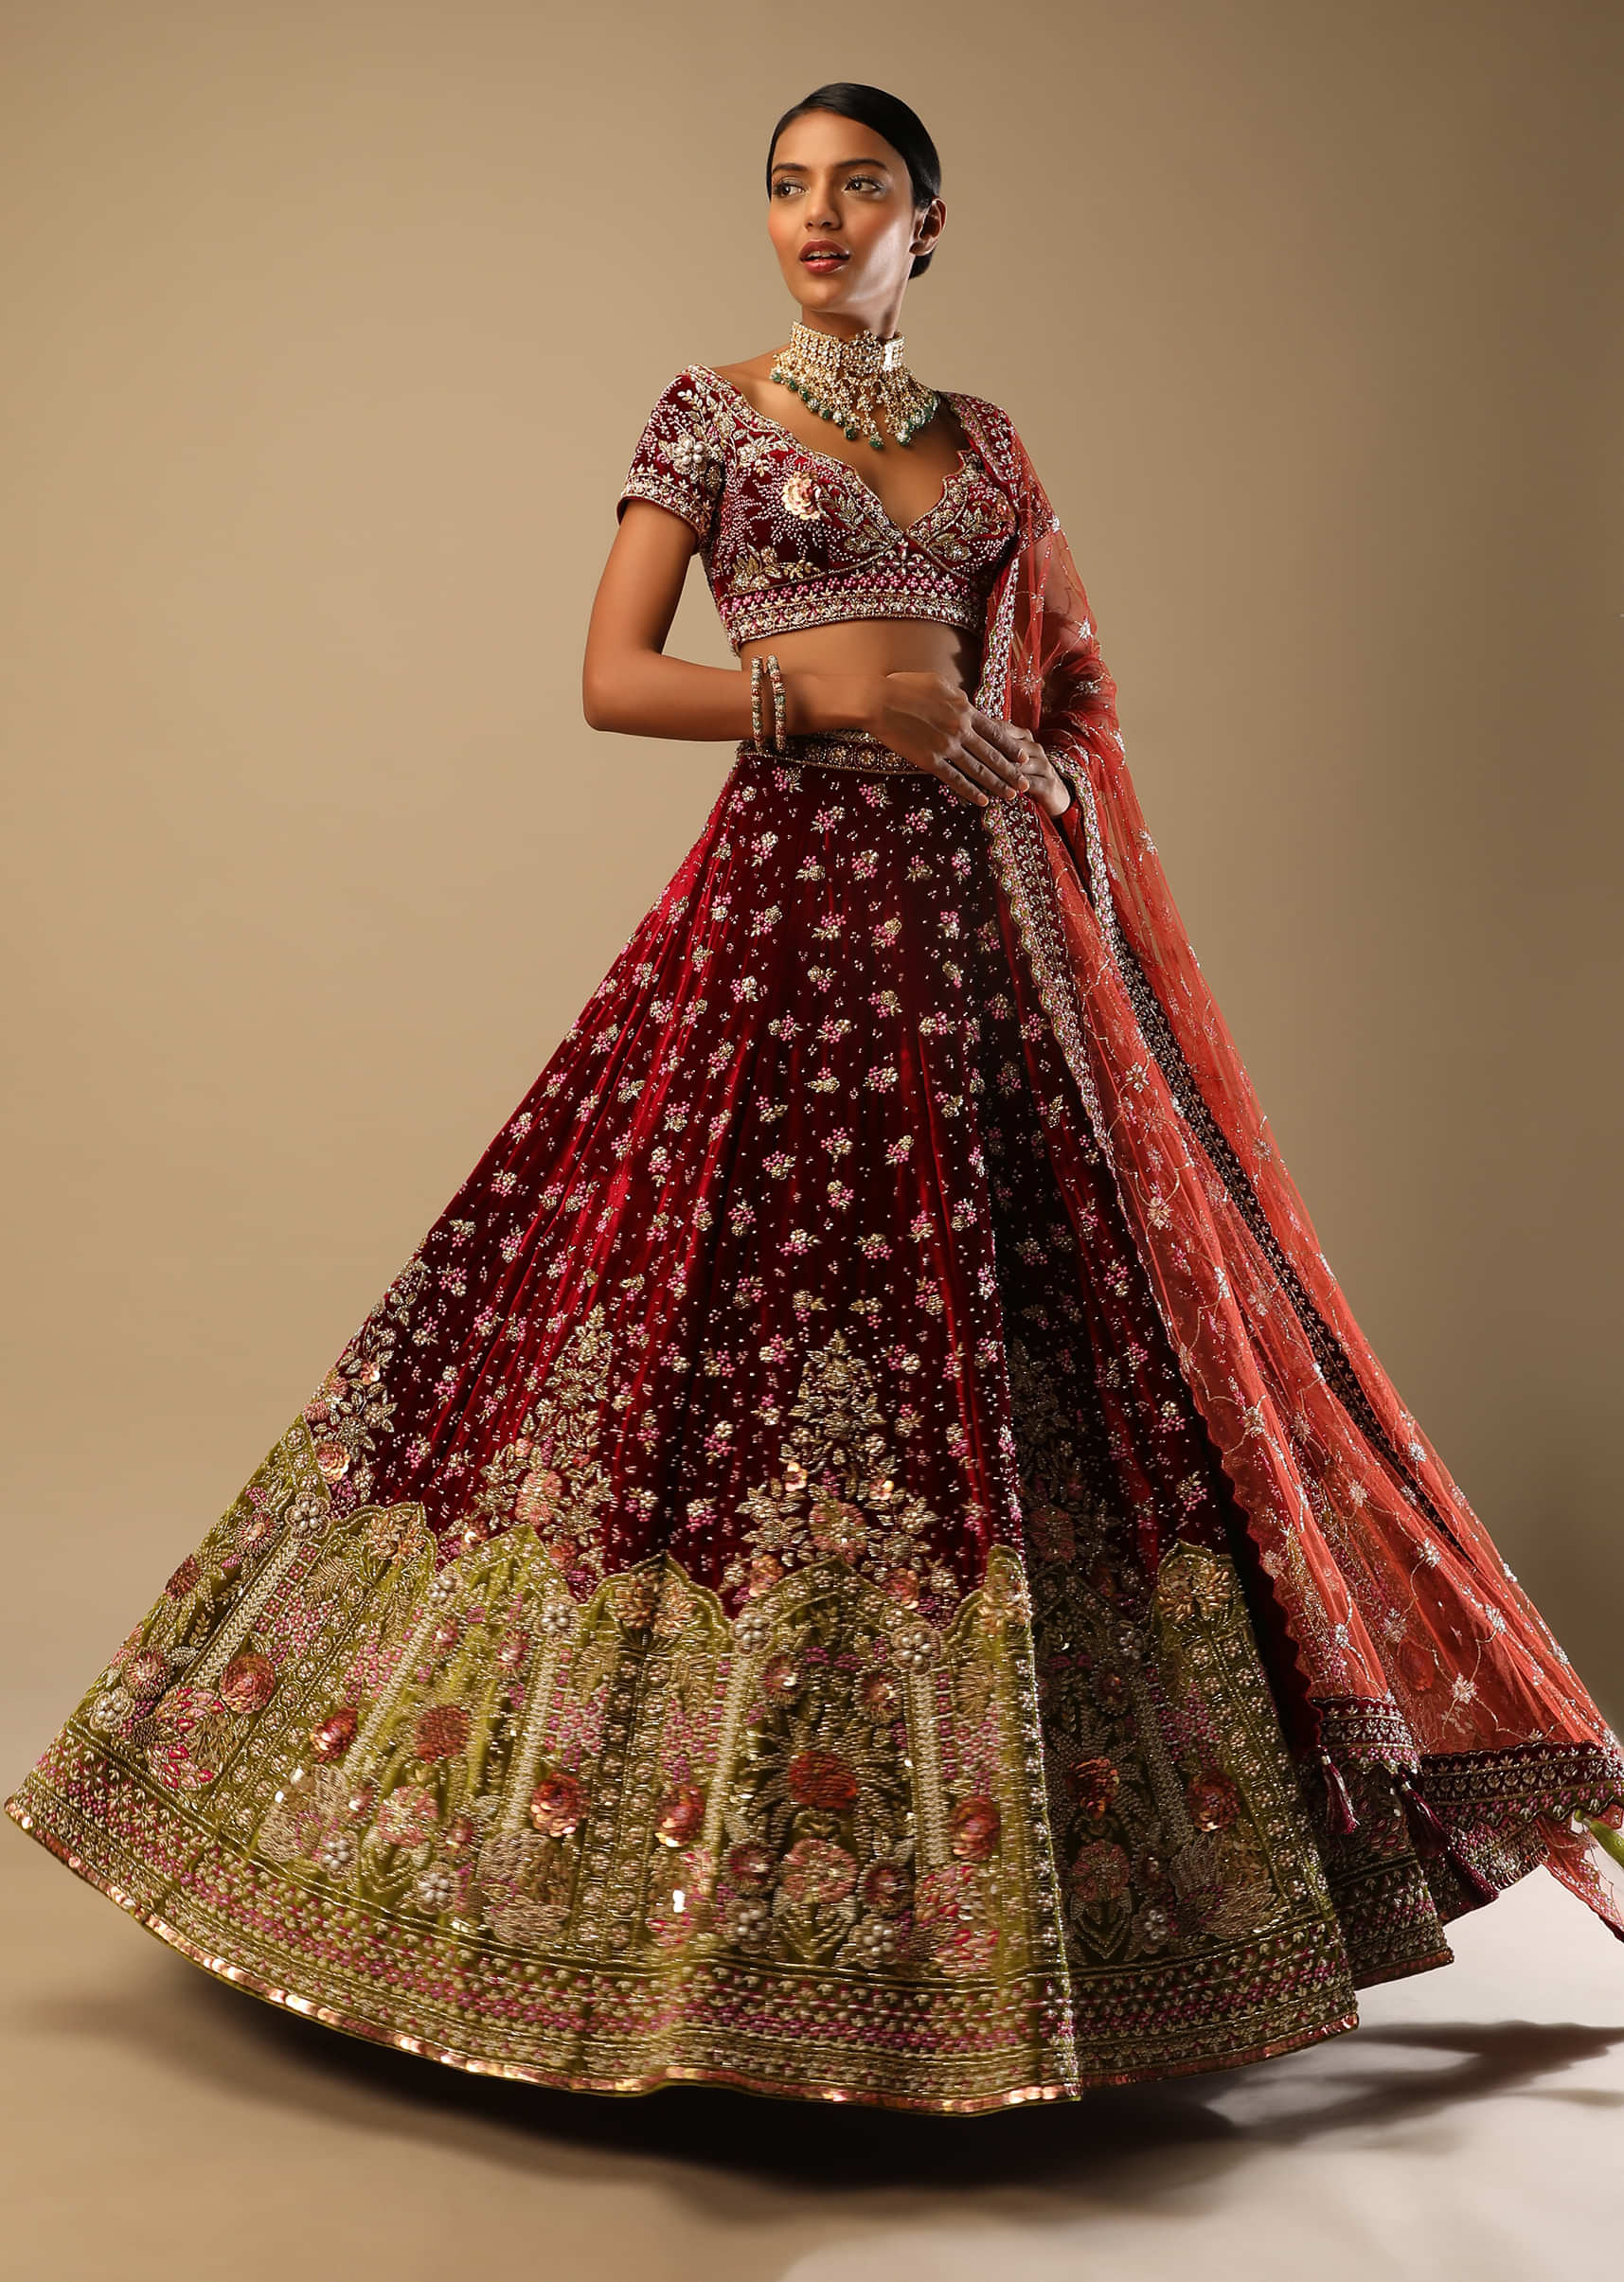 Persian Red Lehenga Choli In Velvet With Moss Green Mughal Border And Multi Colored Hand Embroidered Flowers 